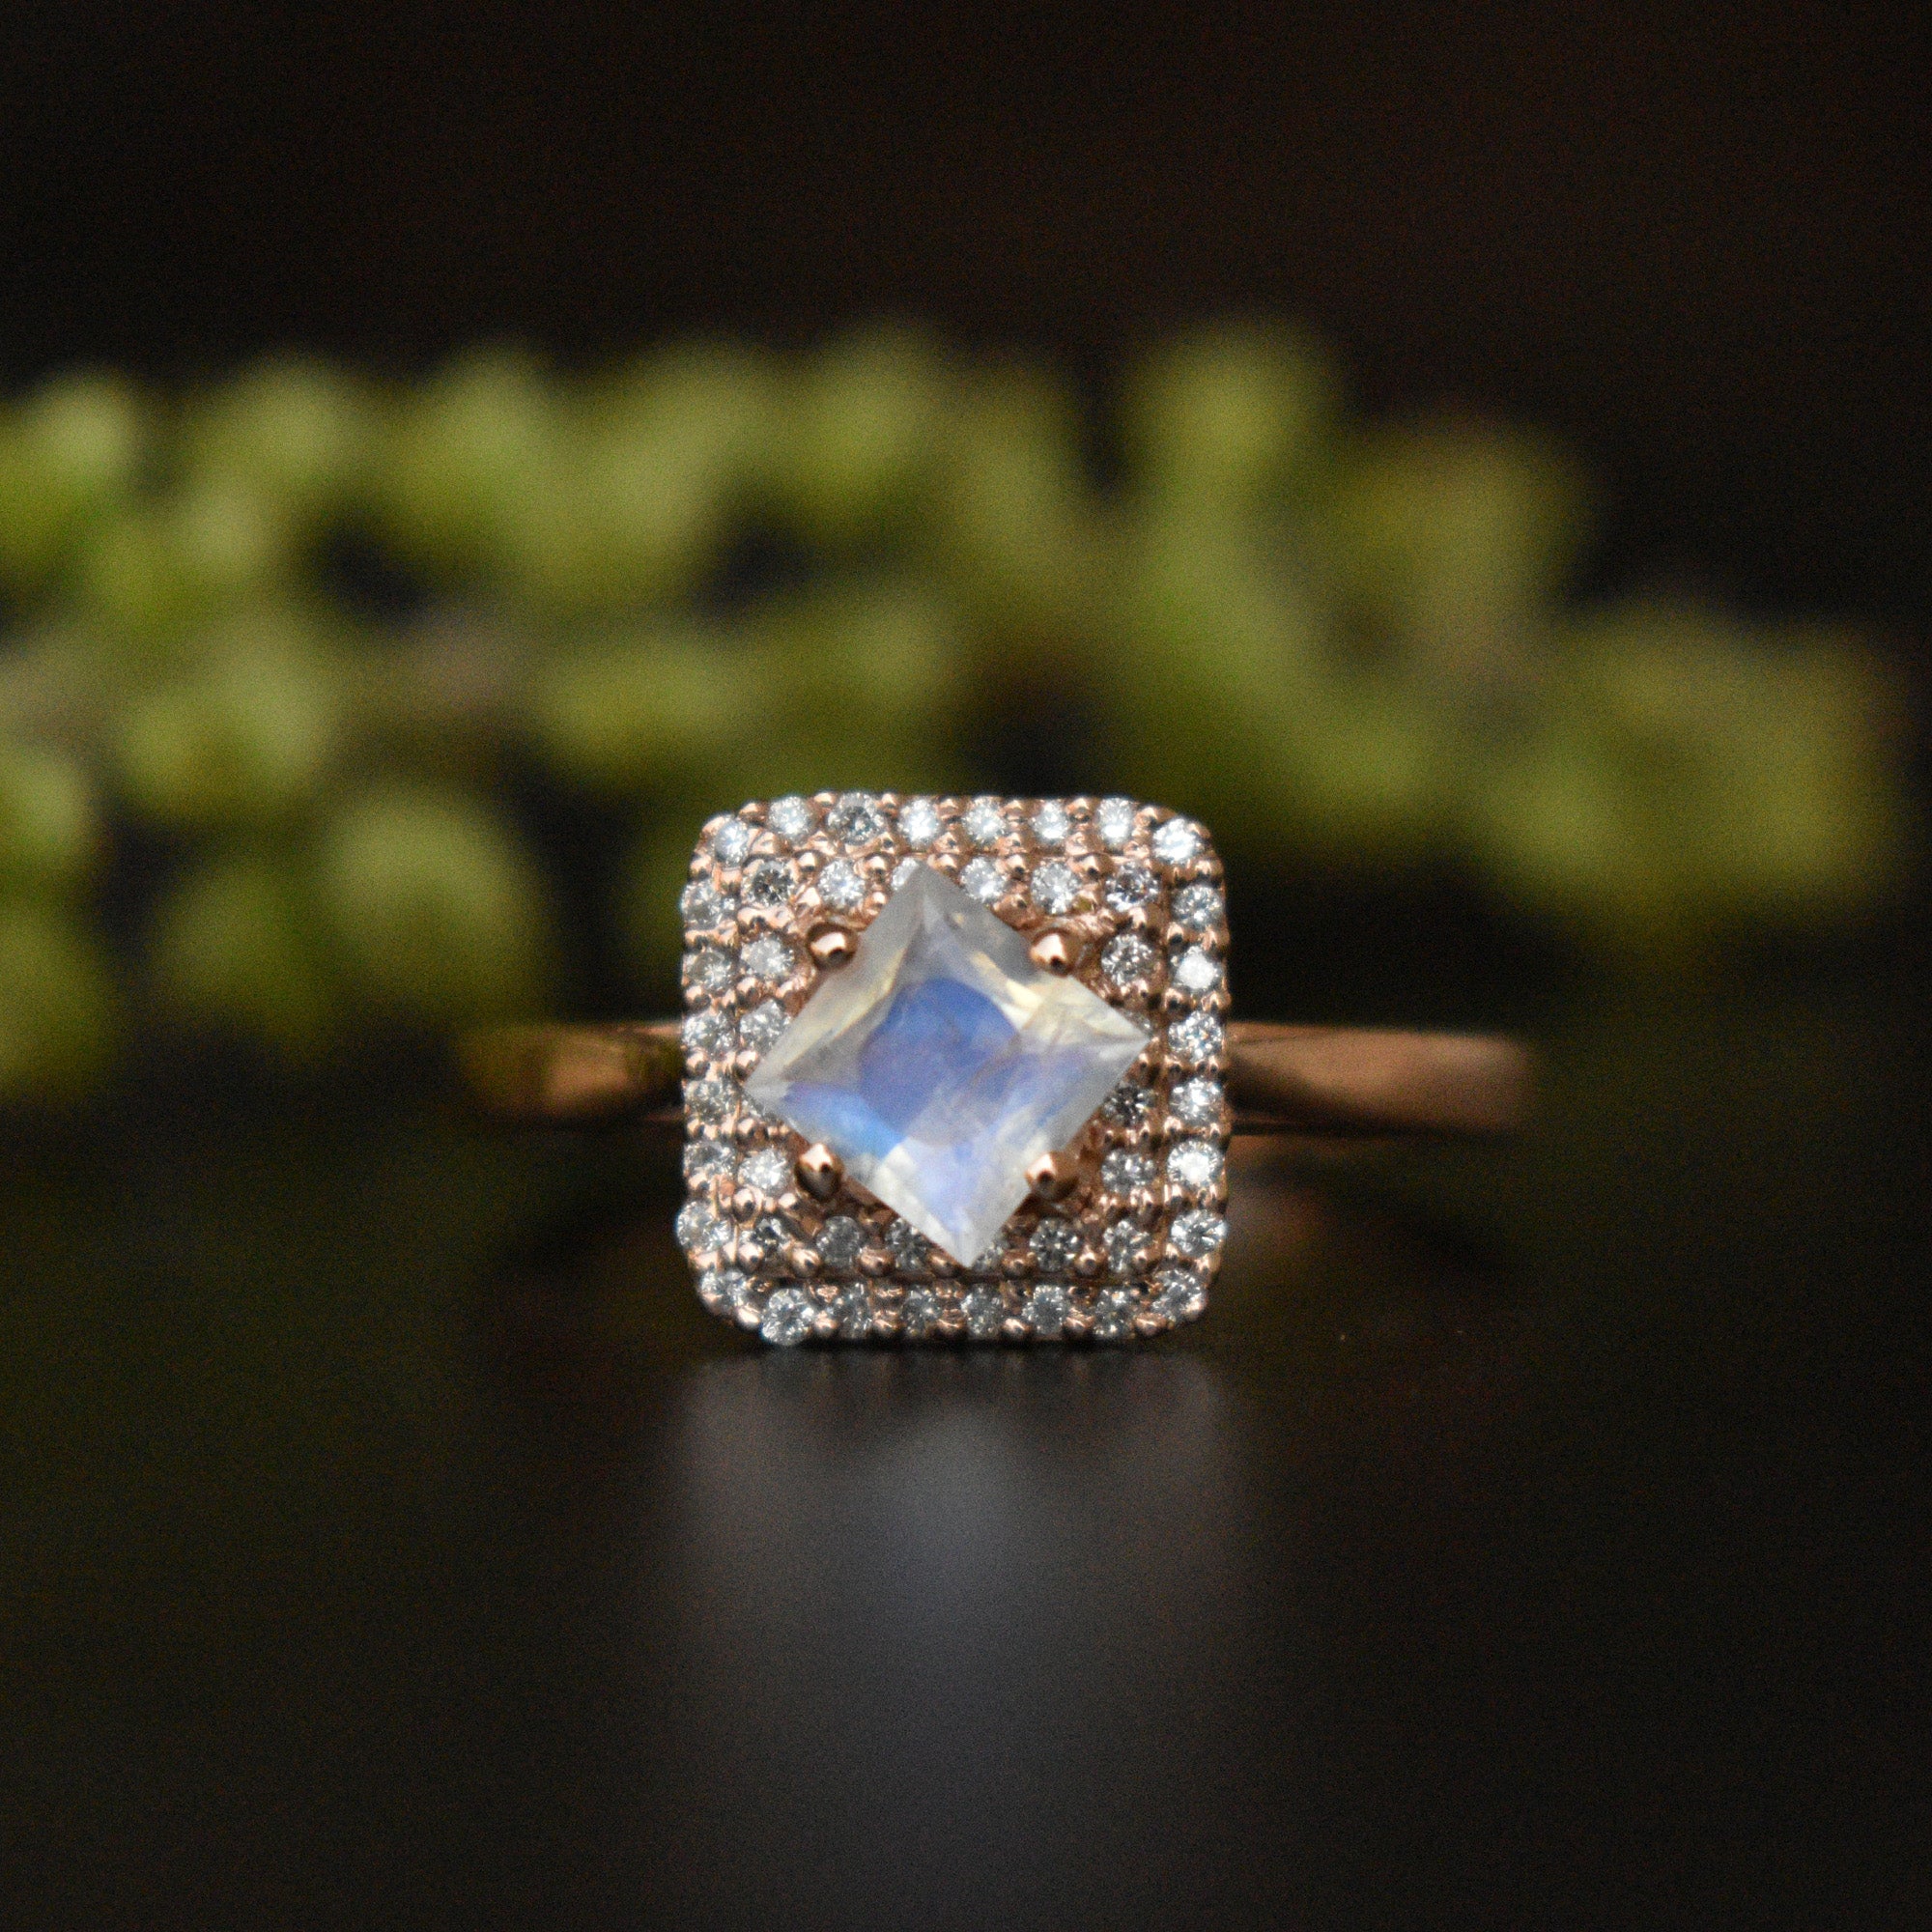 Moonstone Diamond Engagement Ring, Double Halo Ring with Intricate Filigree Shank